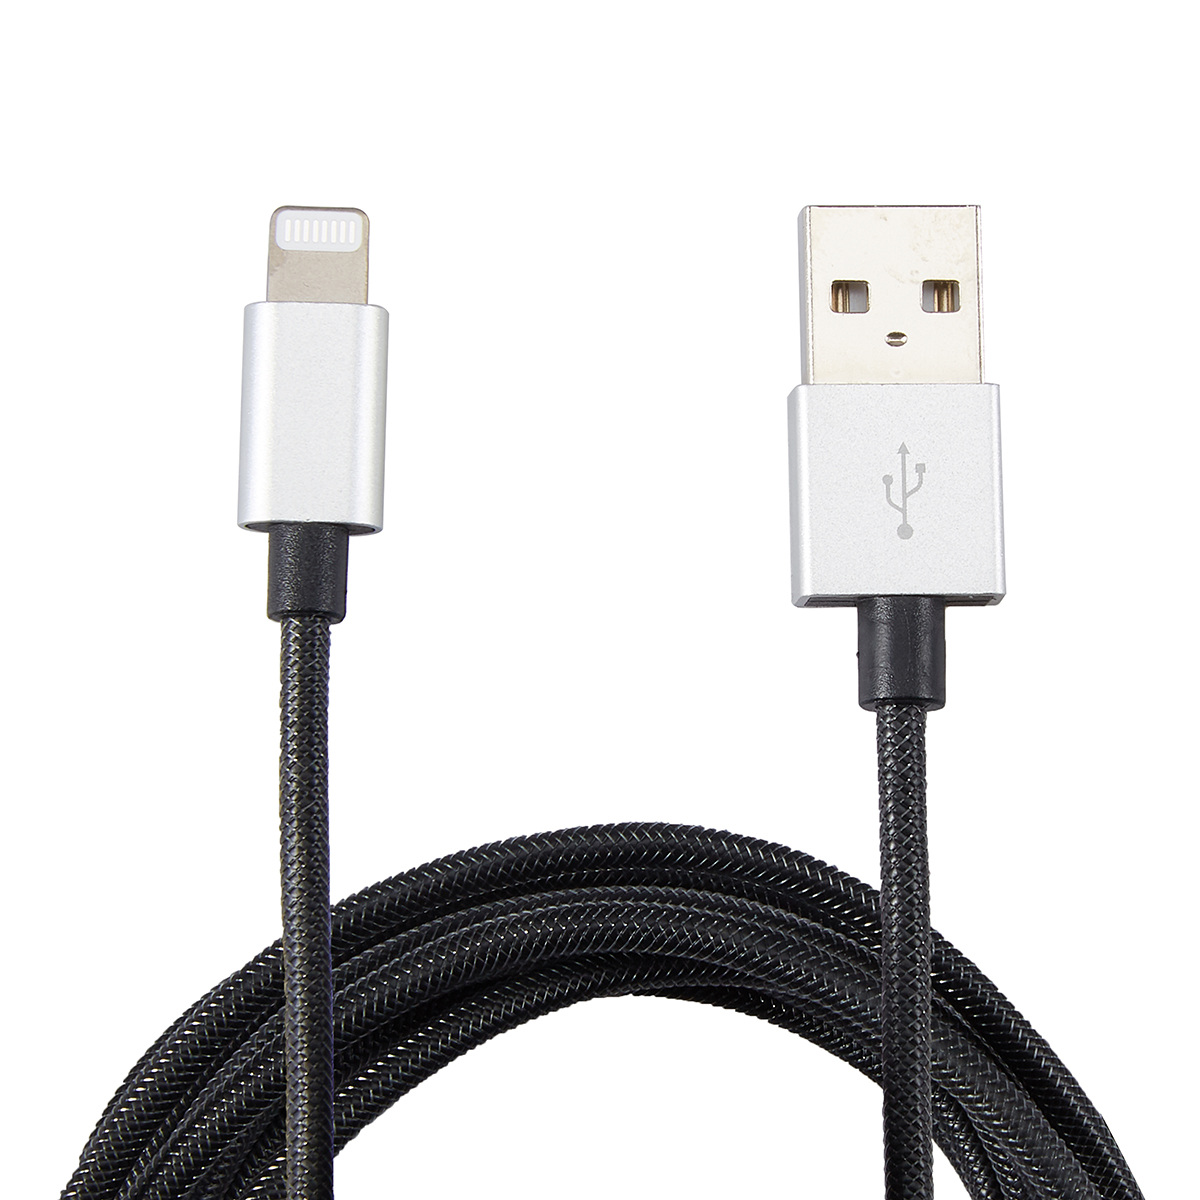 Dark Silver Look USB to Lightning Metal Cable | Kmart